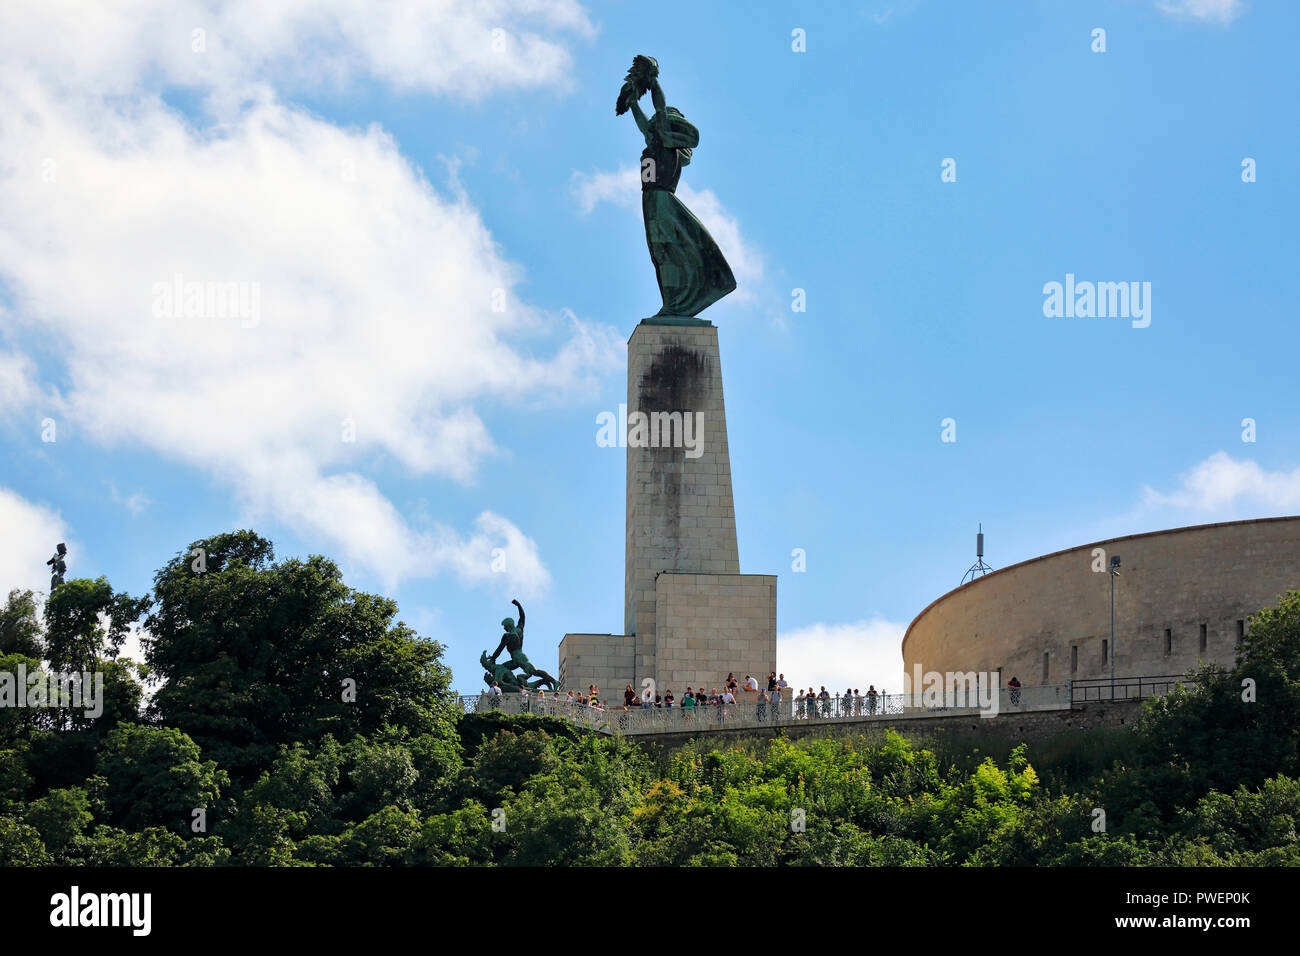 Hungary, Central Hungary, Budapest, Danube, Capital City, Gellert Hill with Liberty Monument, Liberty Statue by Zsigmond Kisfaludi Strobl, tourism, tourists, UNESCO World Heritage Site Stock Photo